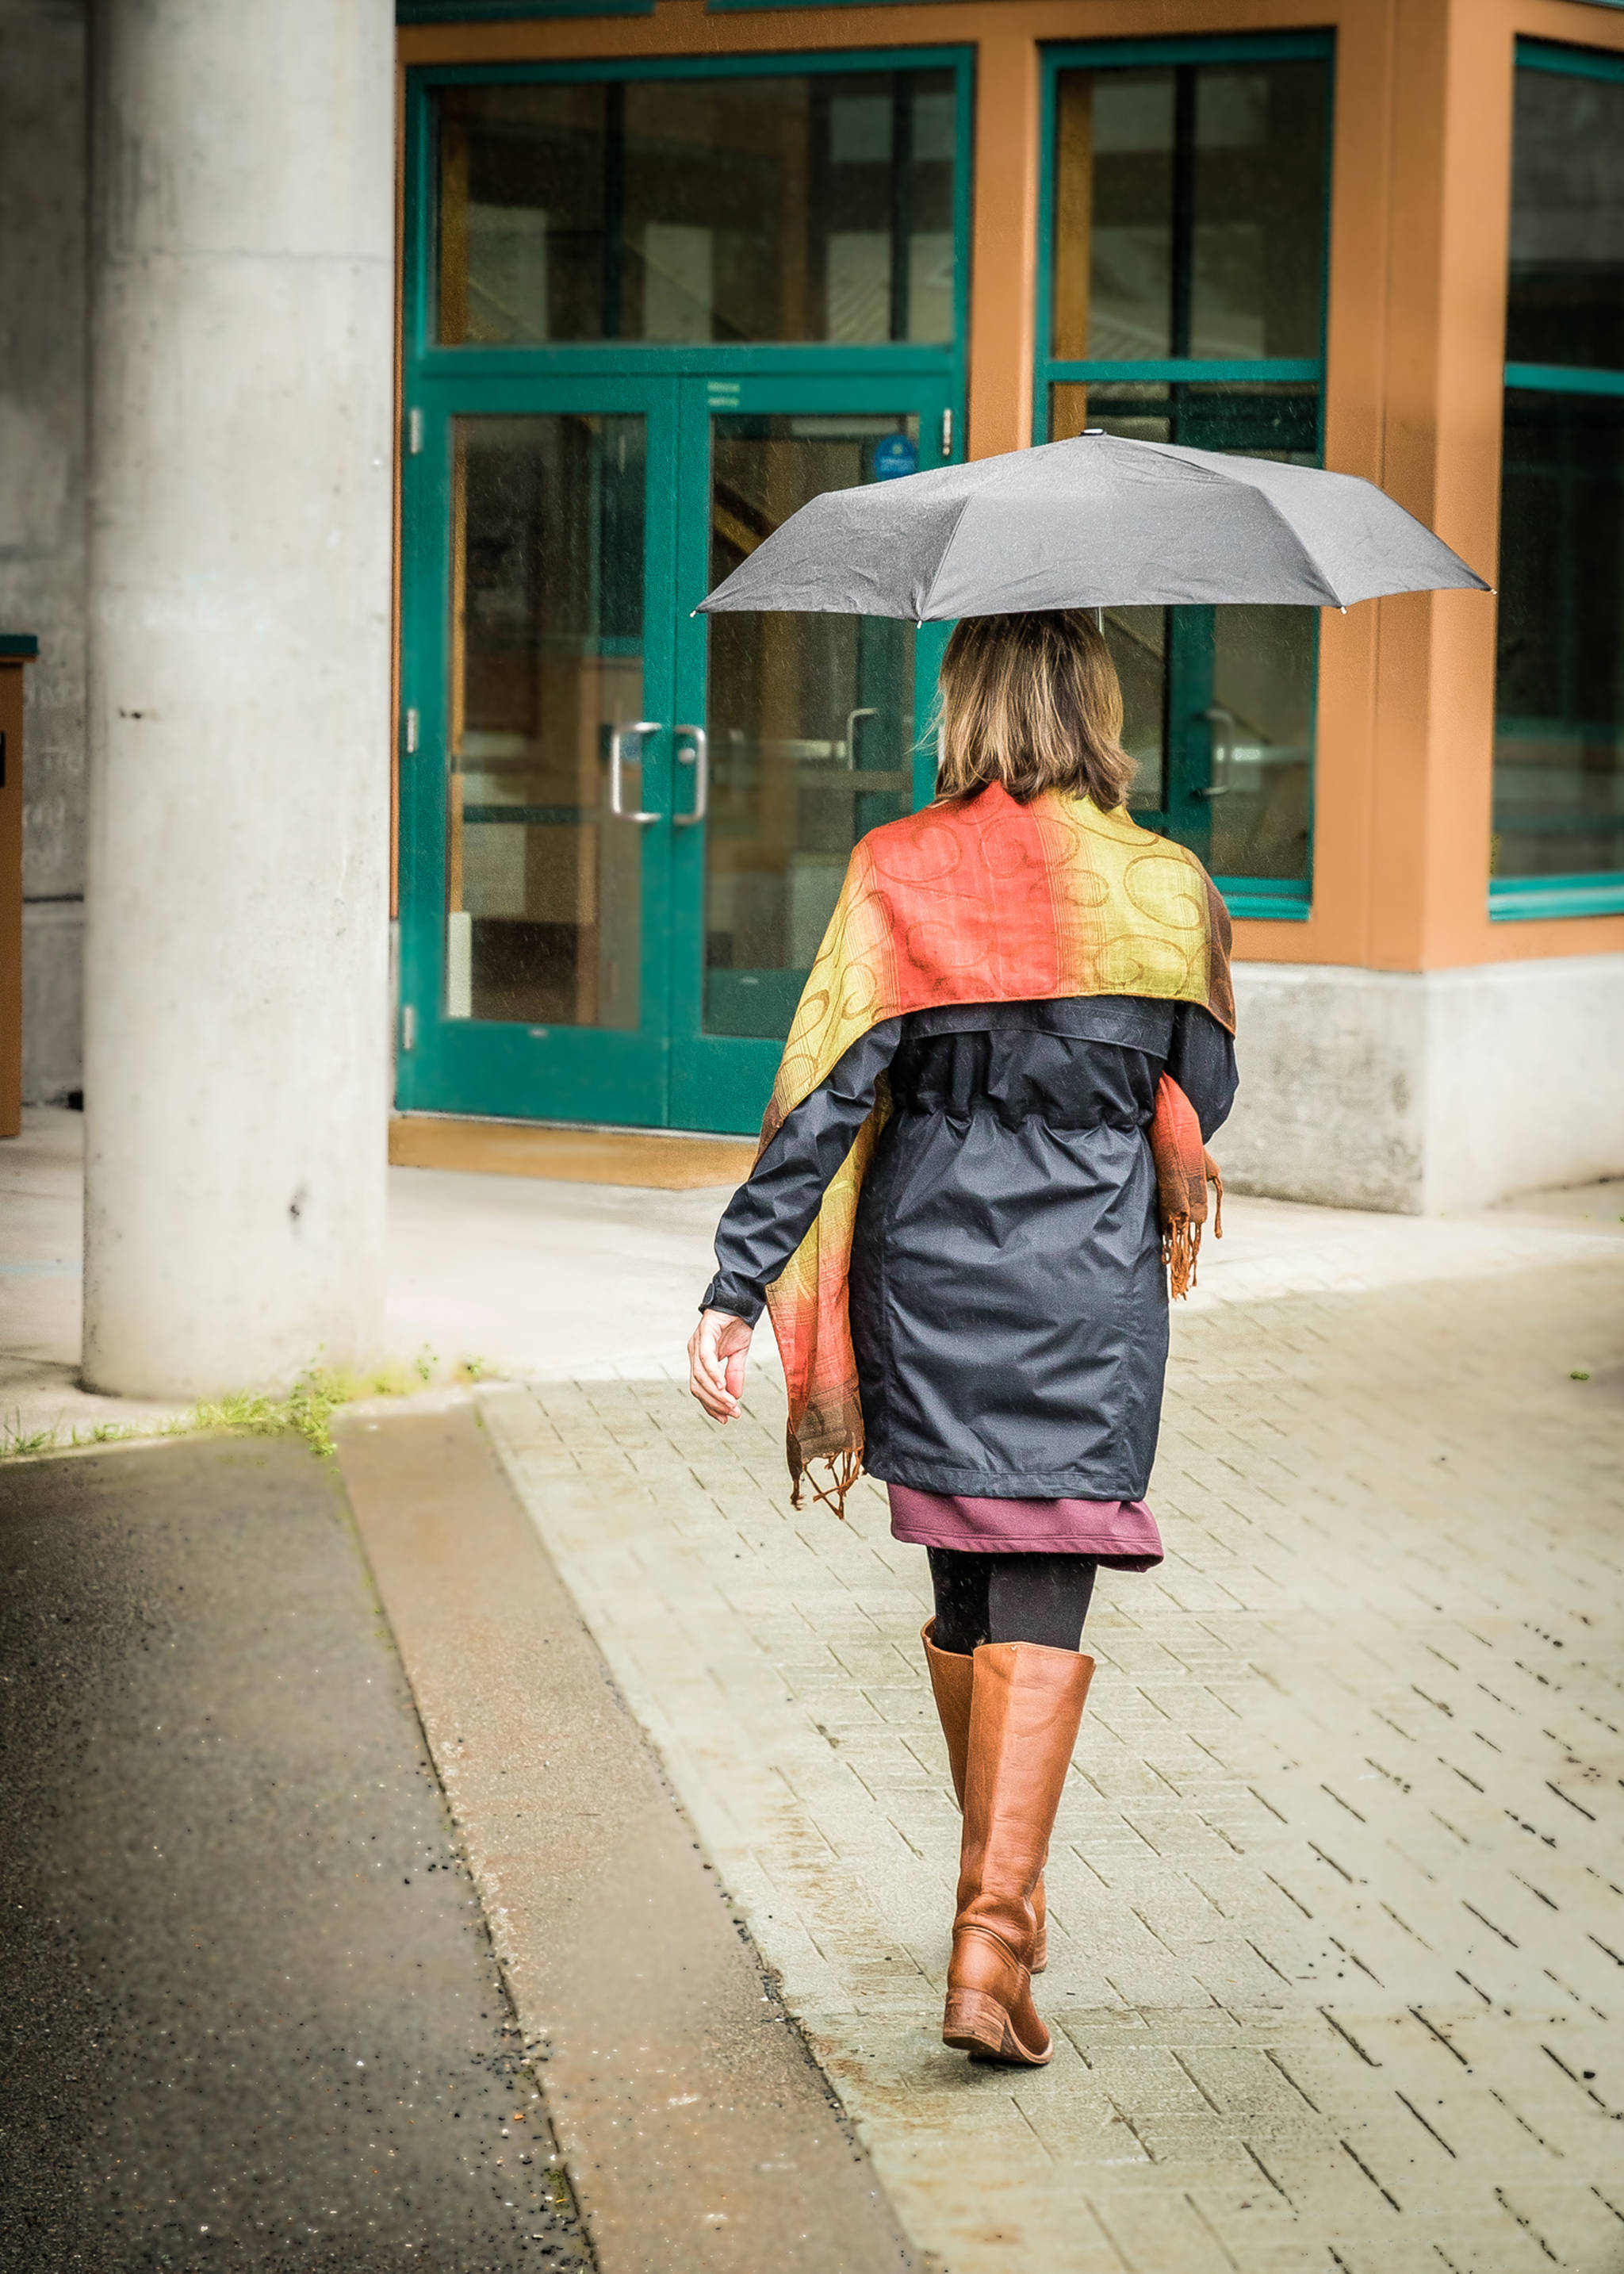 Nov. 4, 2018: This woman reminded me that a spot of color can brighten the grayest of November days. The autumn colors of her dress and scarf — plum, crimson and citron — caught my eye, and her knee-high leather boots suited her outfit perfectly. I also loved the umbrella. Umbrellas are often overlooked in favor of a rain jacket, but they can really save the day, especially in a wet climate.